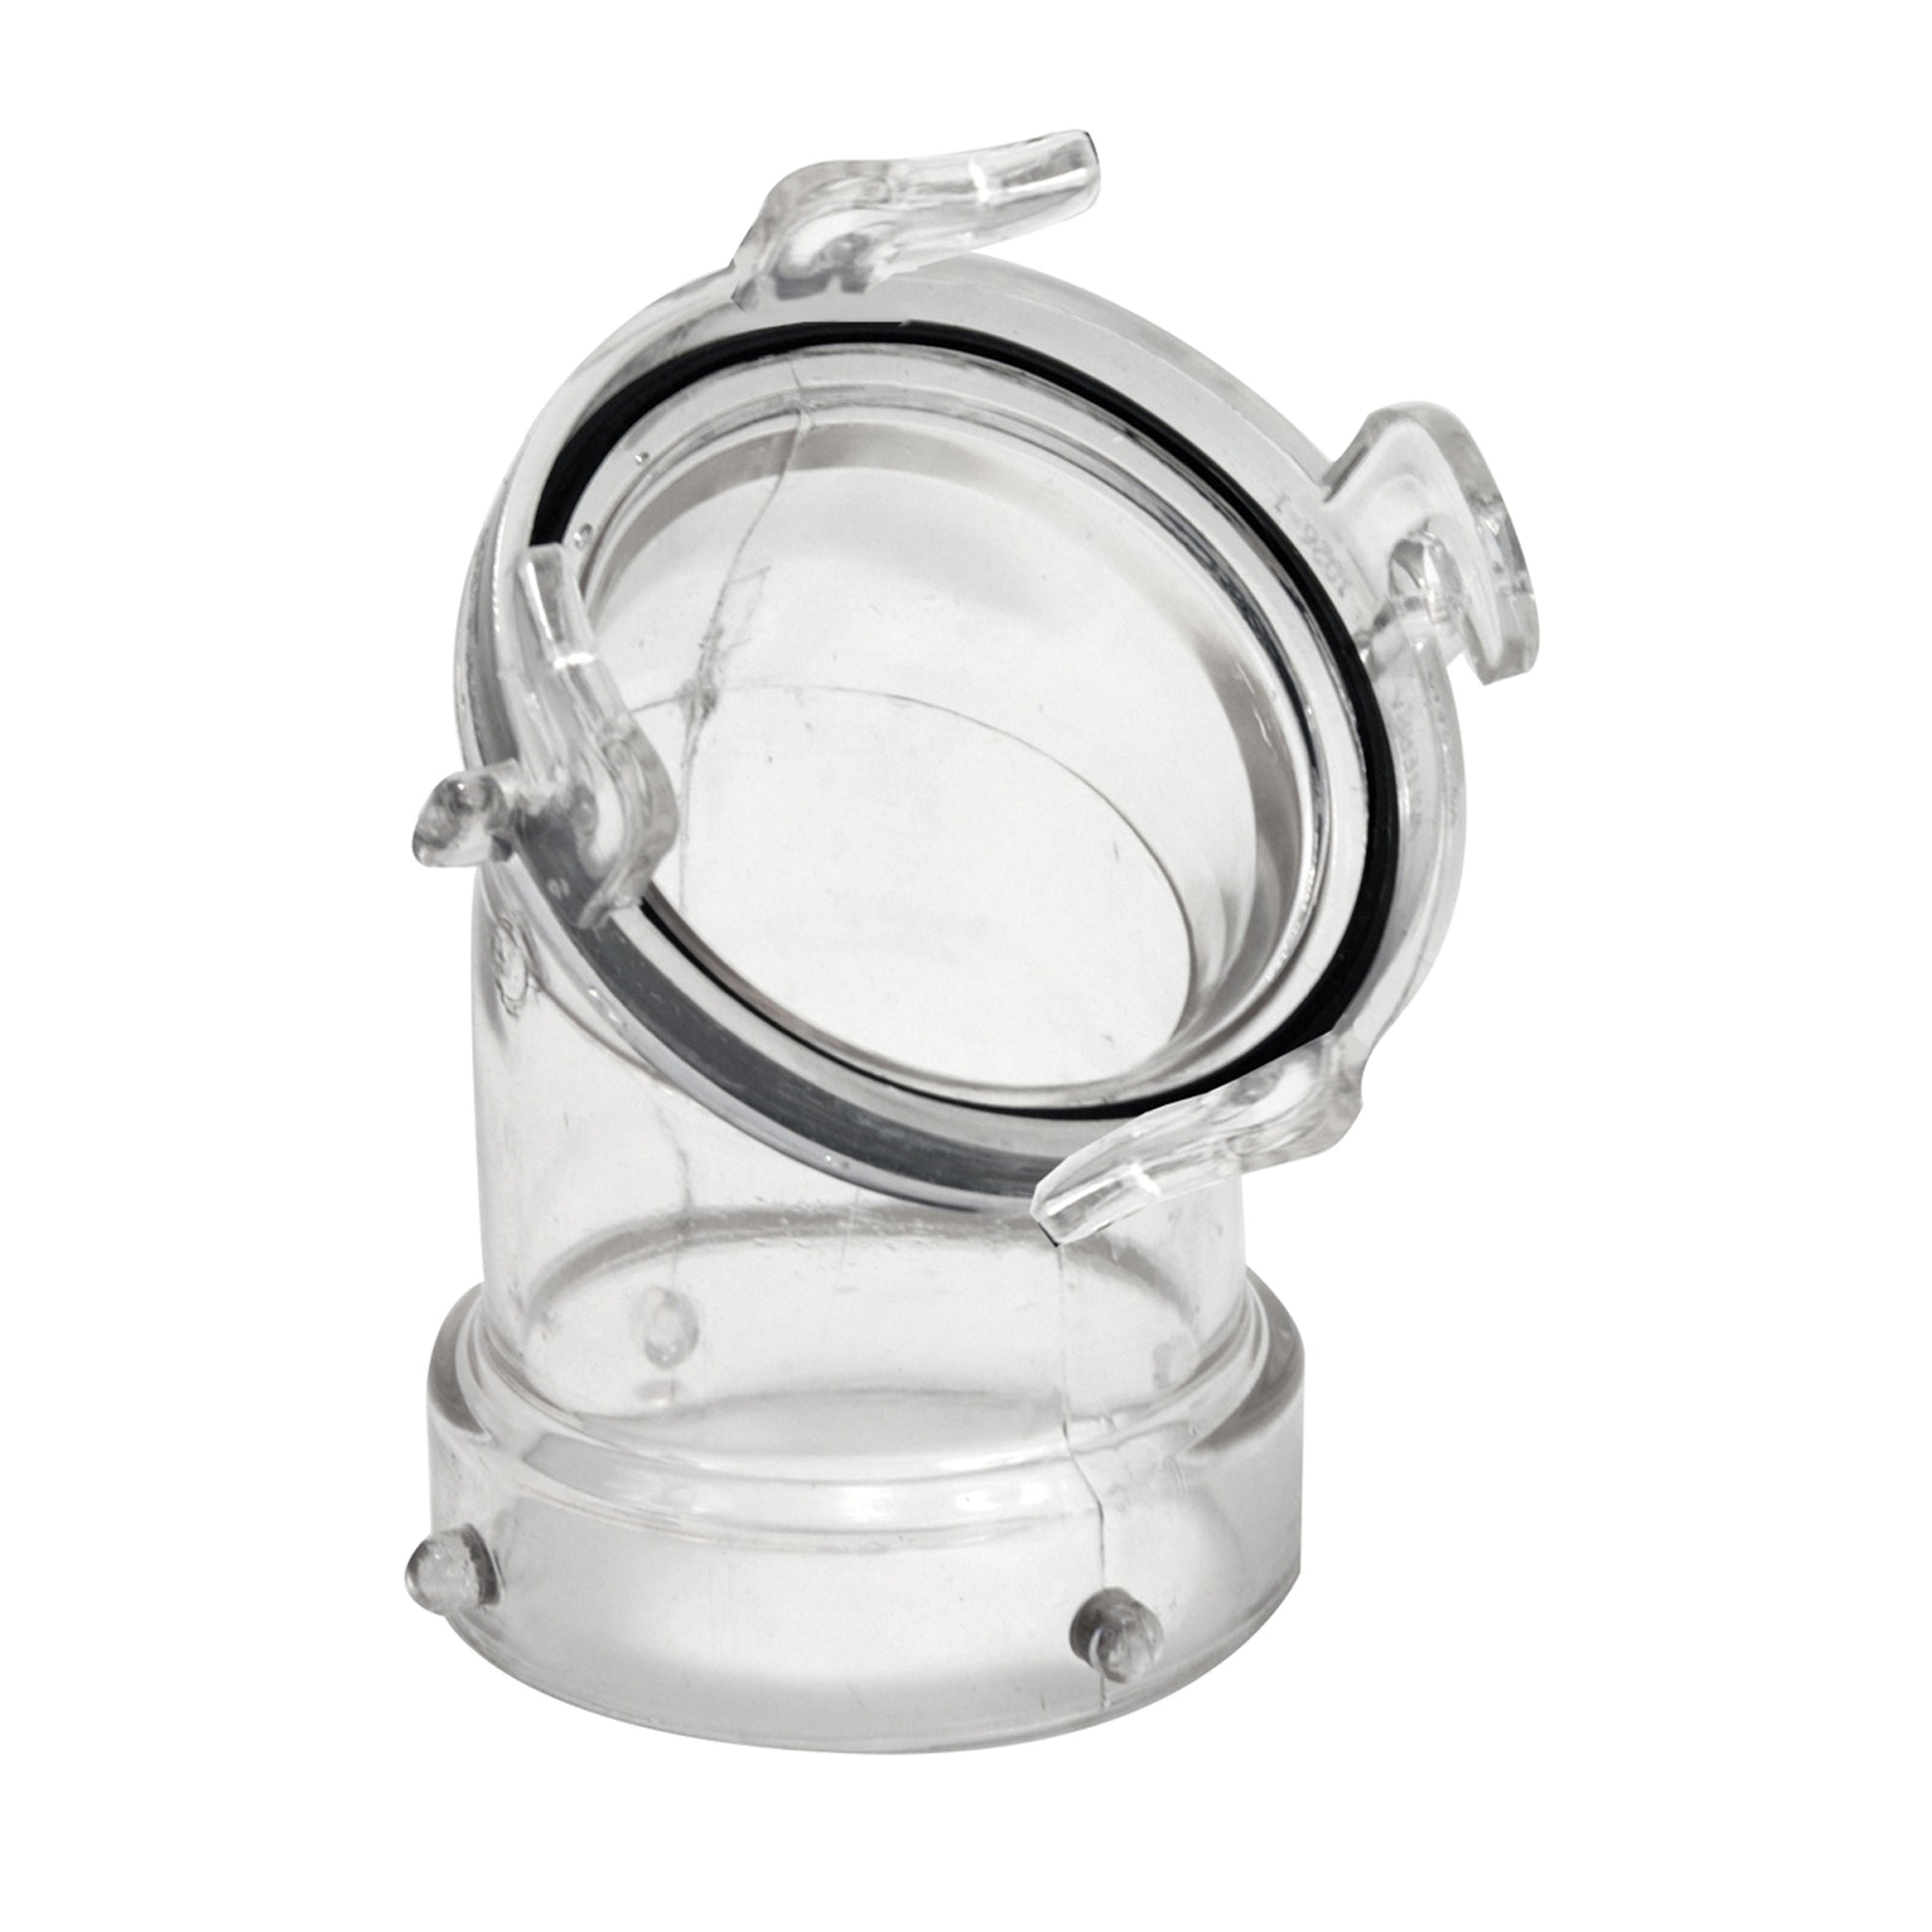 Valterra T1026-1 ClearView Hose Adapter - 45° with 3" Bay Lugs